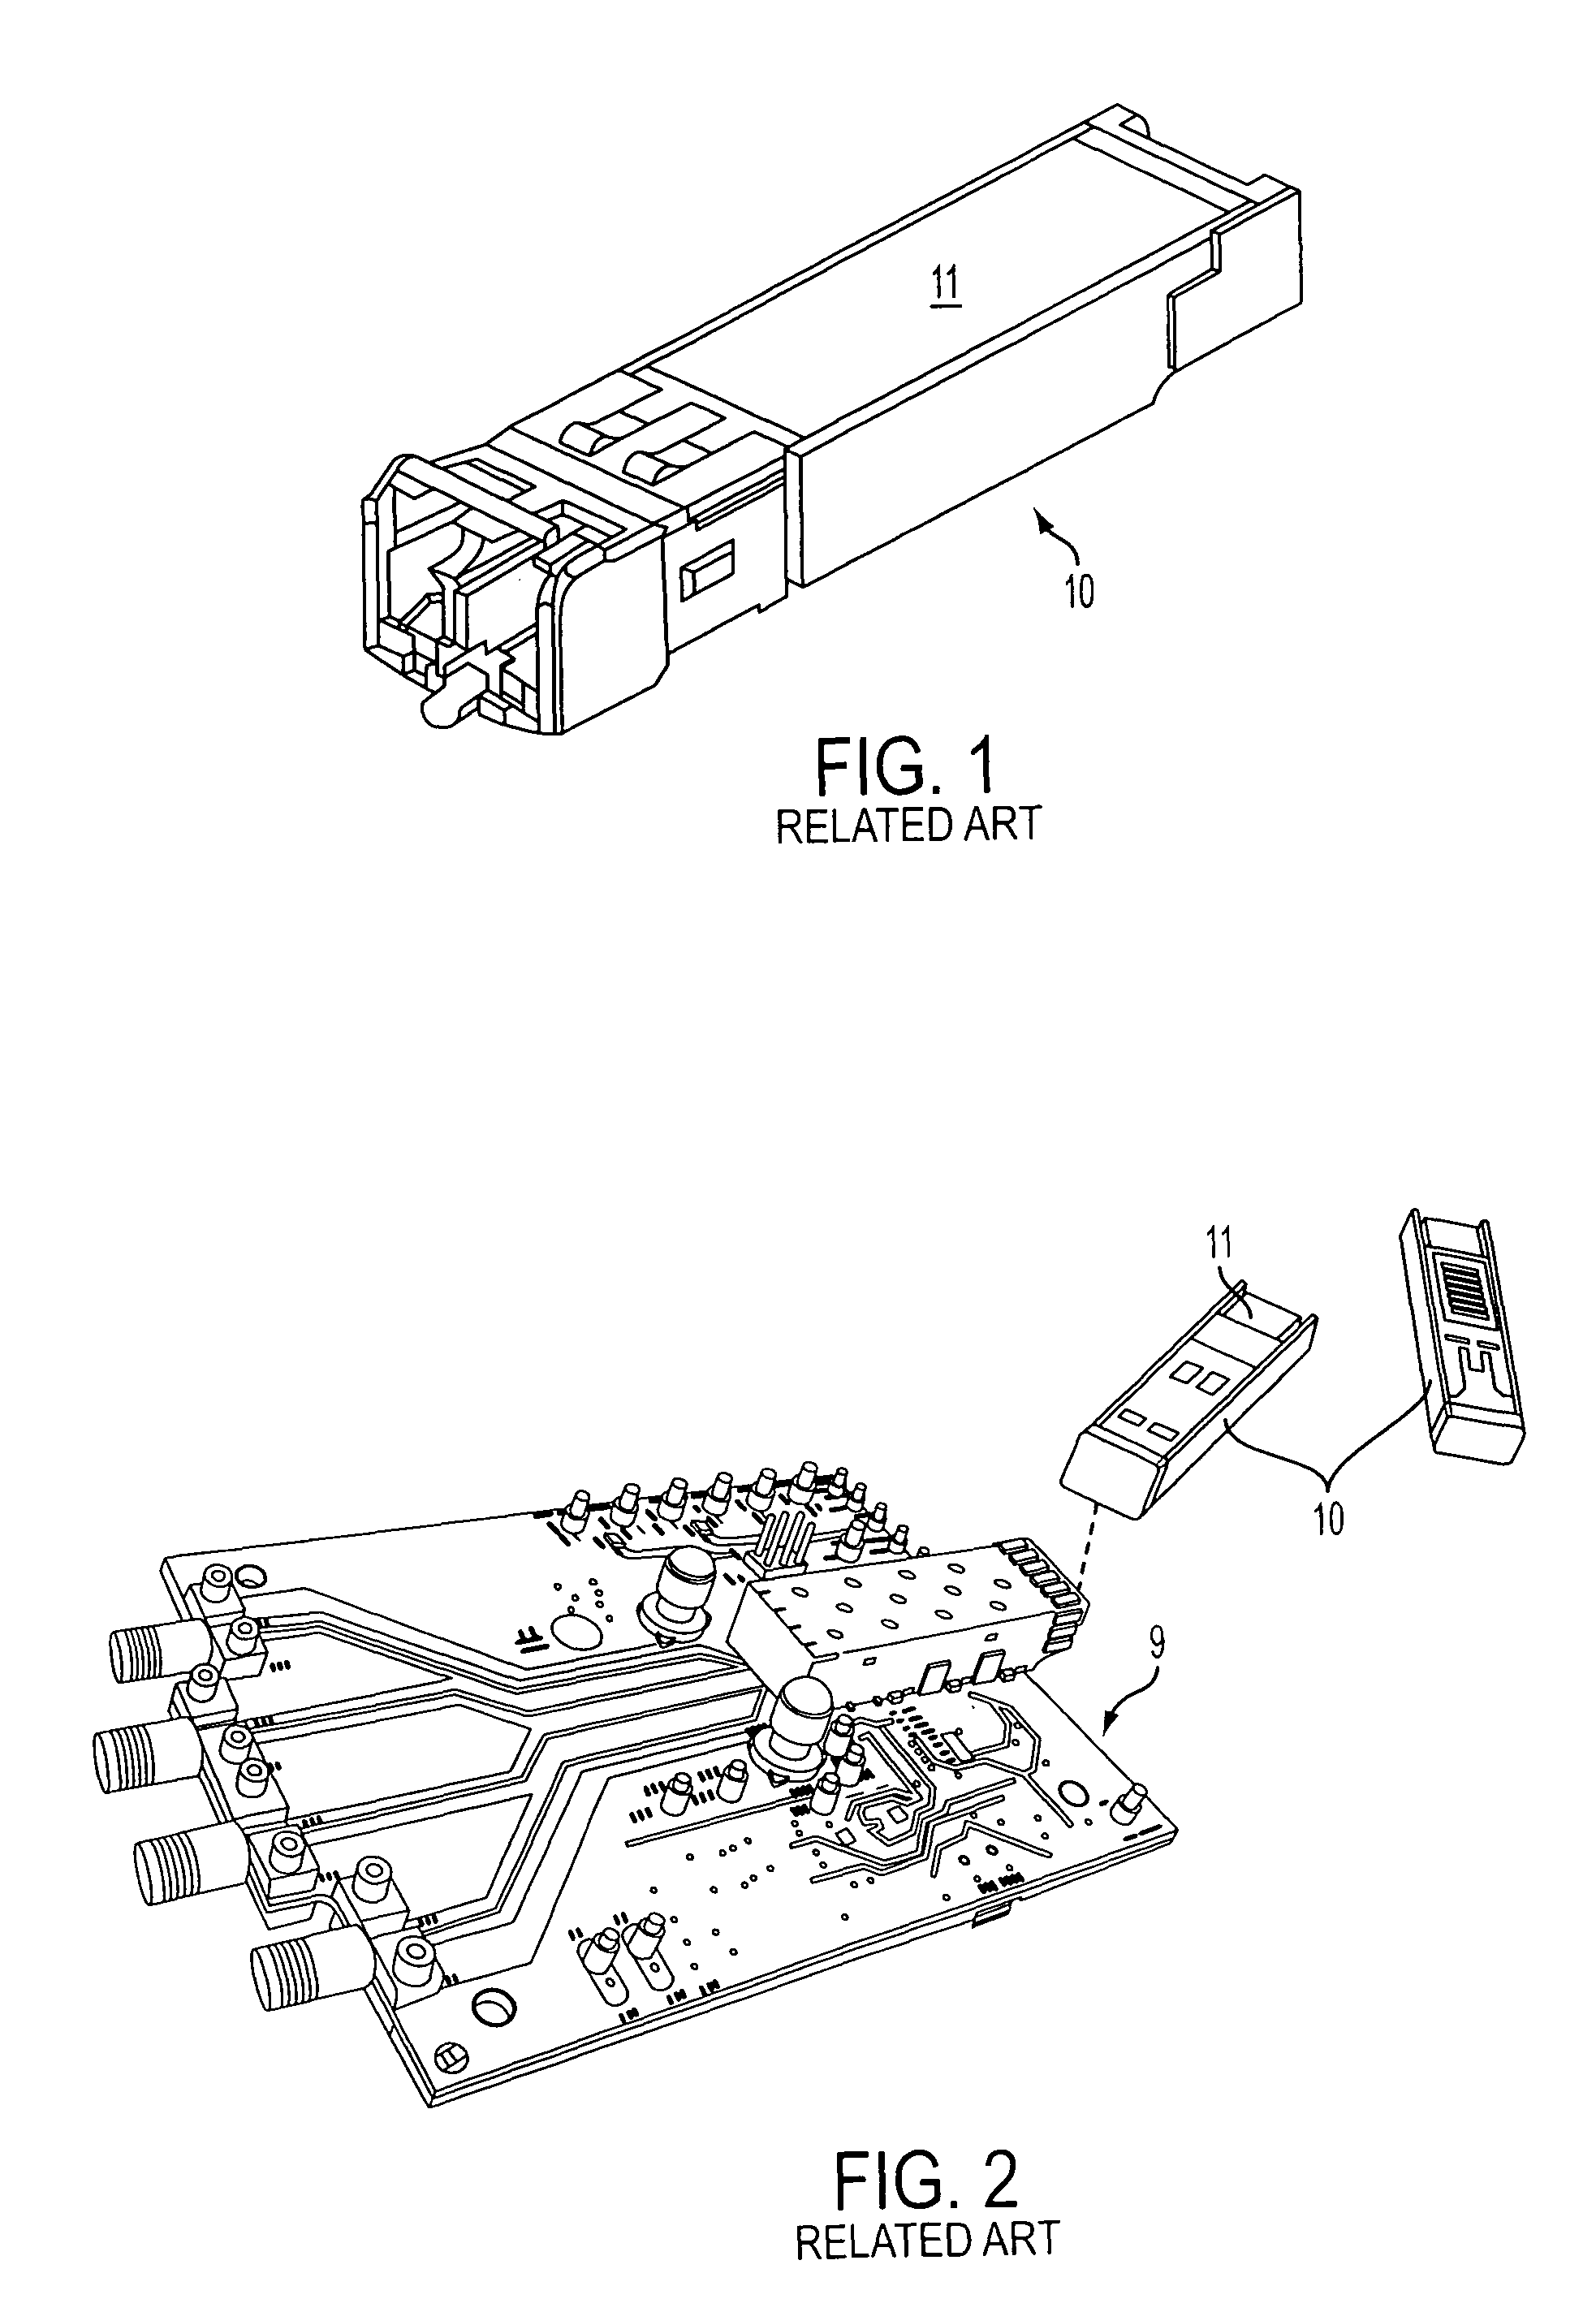 Small form factor pluggable (SFP) checking device for reading from and determining type of inserted SFP transceiver module or other optical device